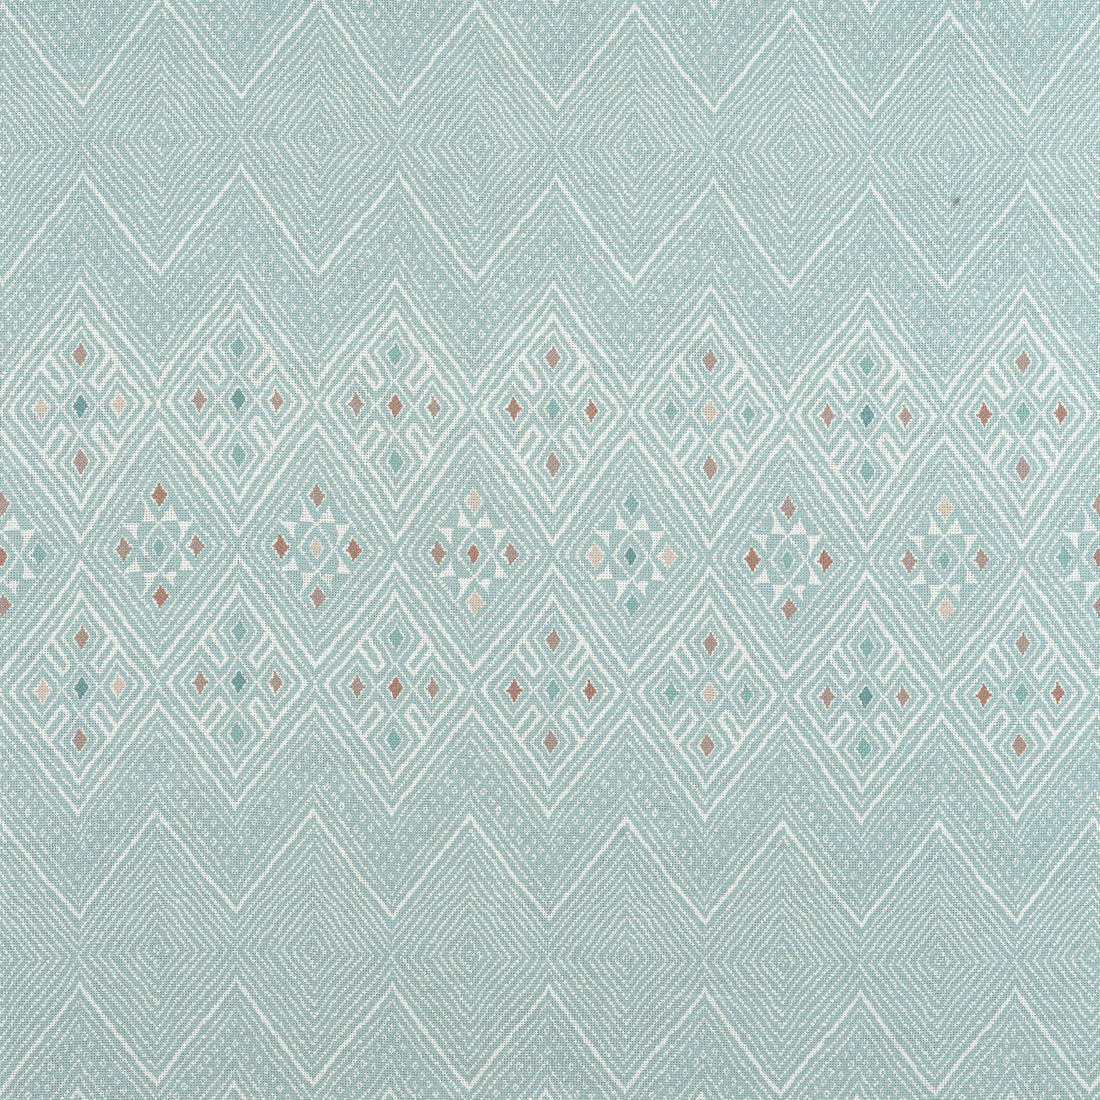 High Plains fabric in spa blue color - pattern number F913229 - by Thibaut in the Mesa collection